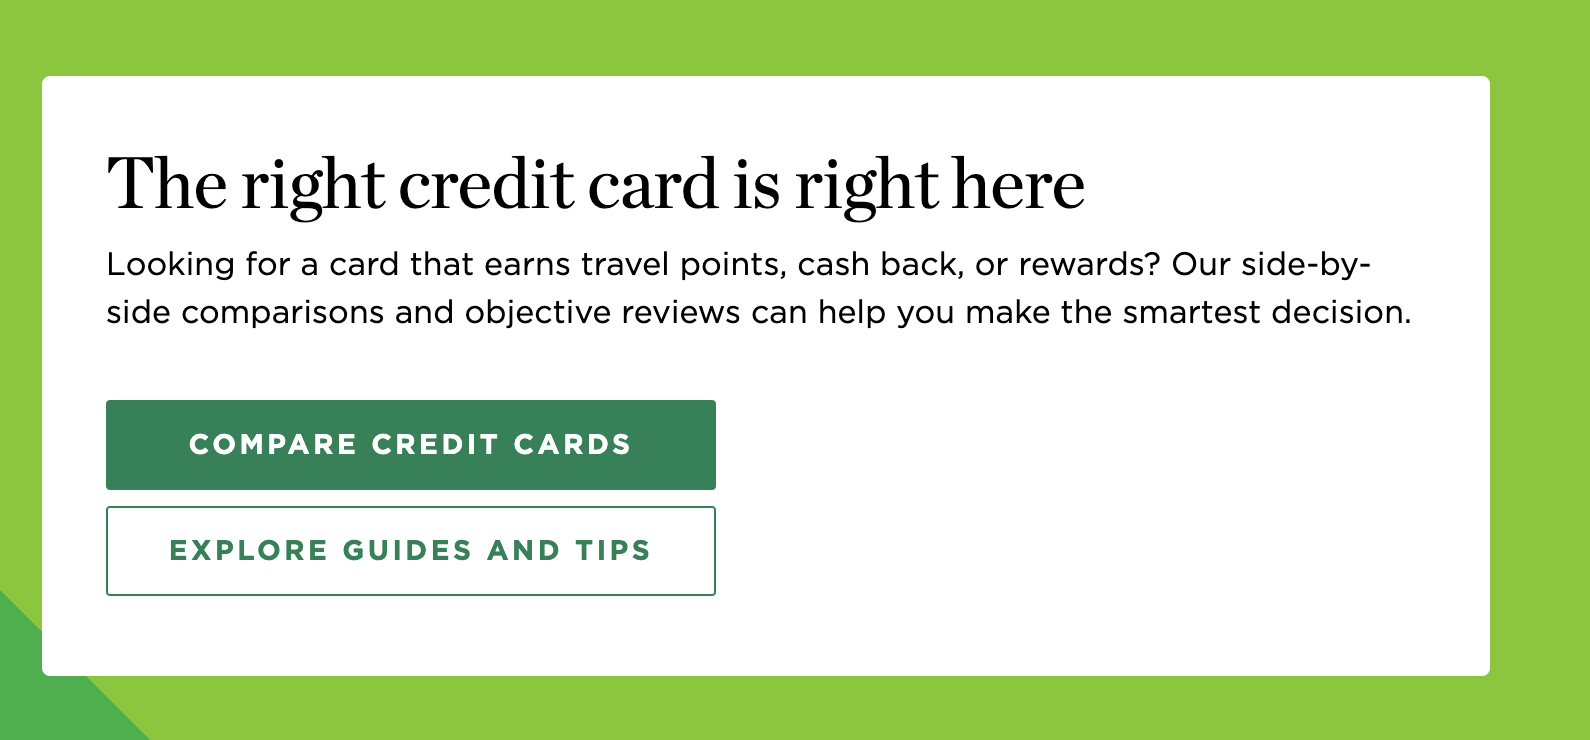 The right credit card is here.  Looking for a card that earns you travel points, cash back, or rewards?  Side-by-side comparisons and objective reviews can help you make the smartest decision.  Key one: Compare credit cards.  Key two: Explore guides and tips.